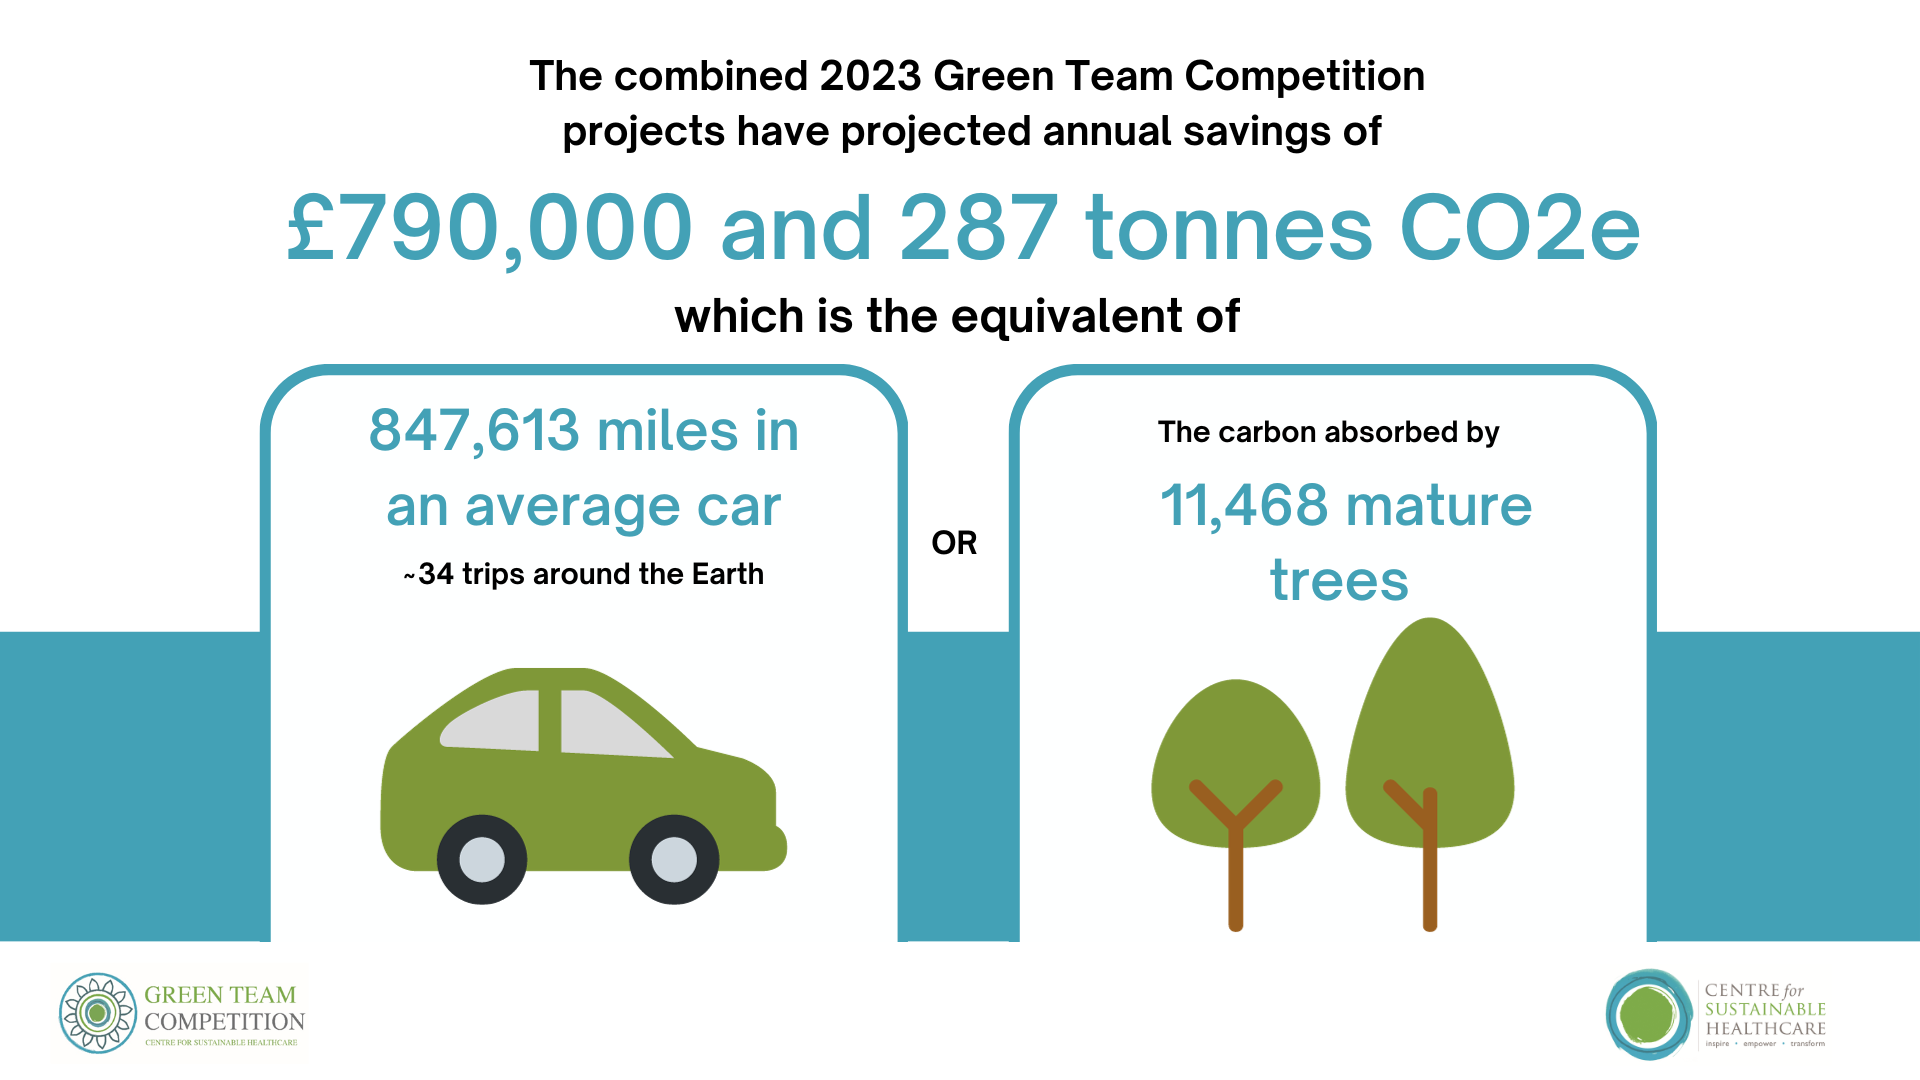 Combine saving of 2023 Green Team Competitions 